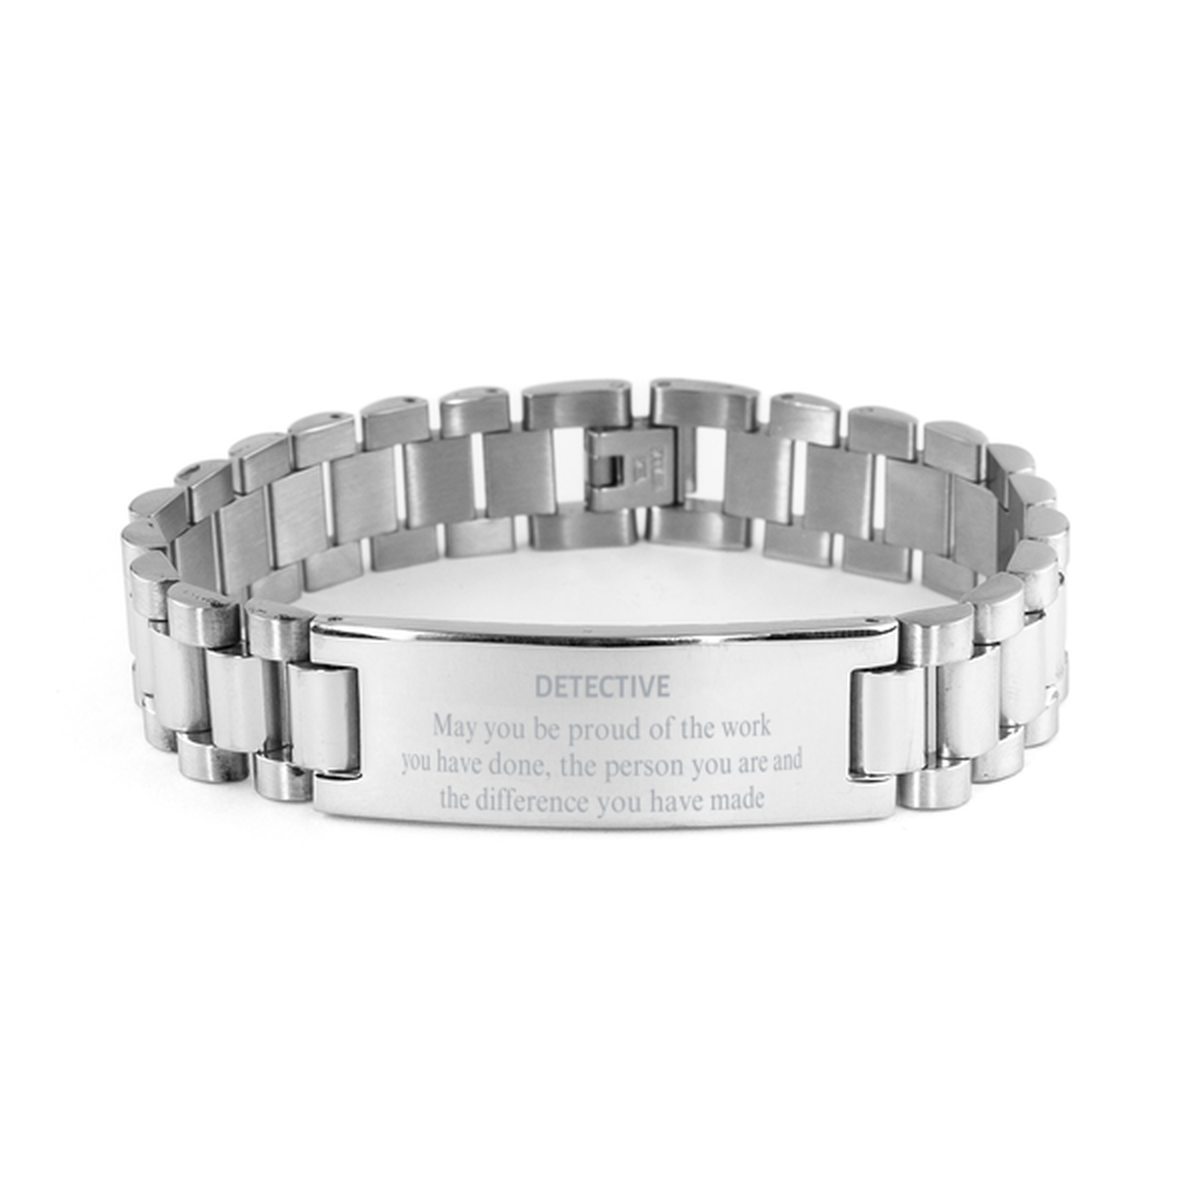 Detective May you be proud of the work you have done, Retirement Detective Ladder Stainless Steel Bracelet for Colleague Appreciation Gifts Amazing for Detective